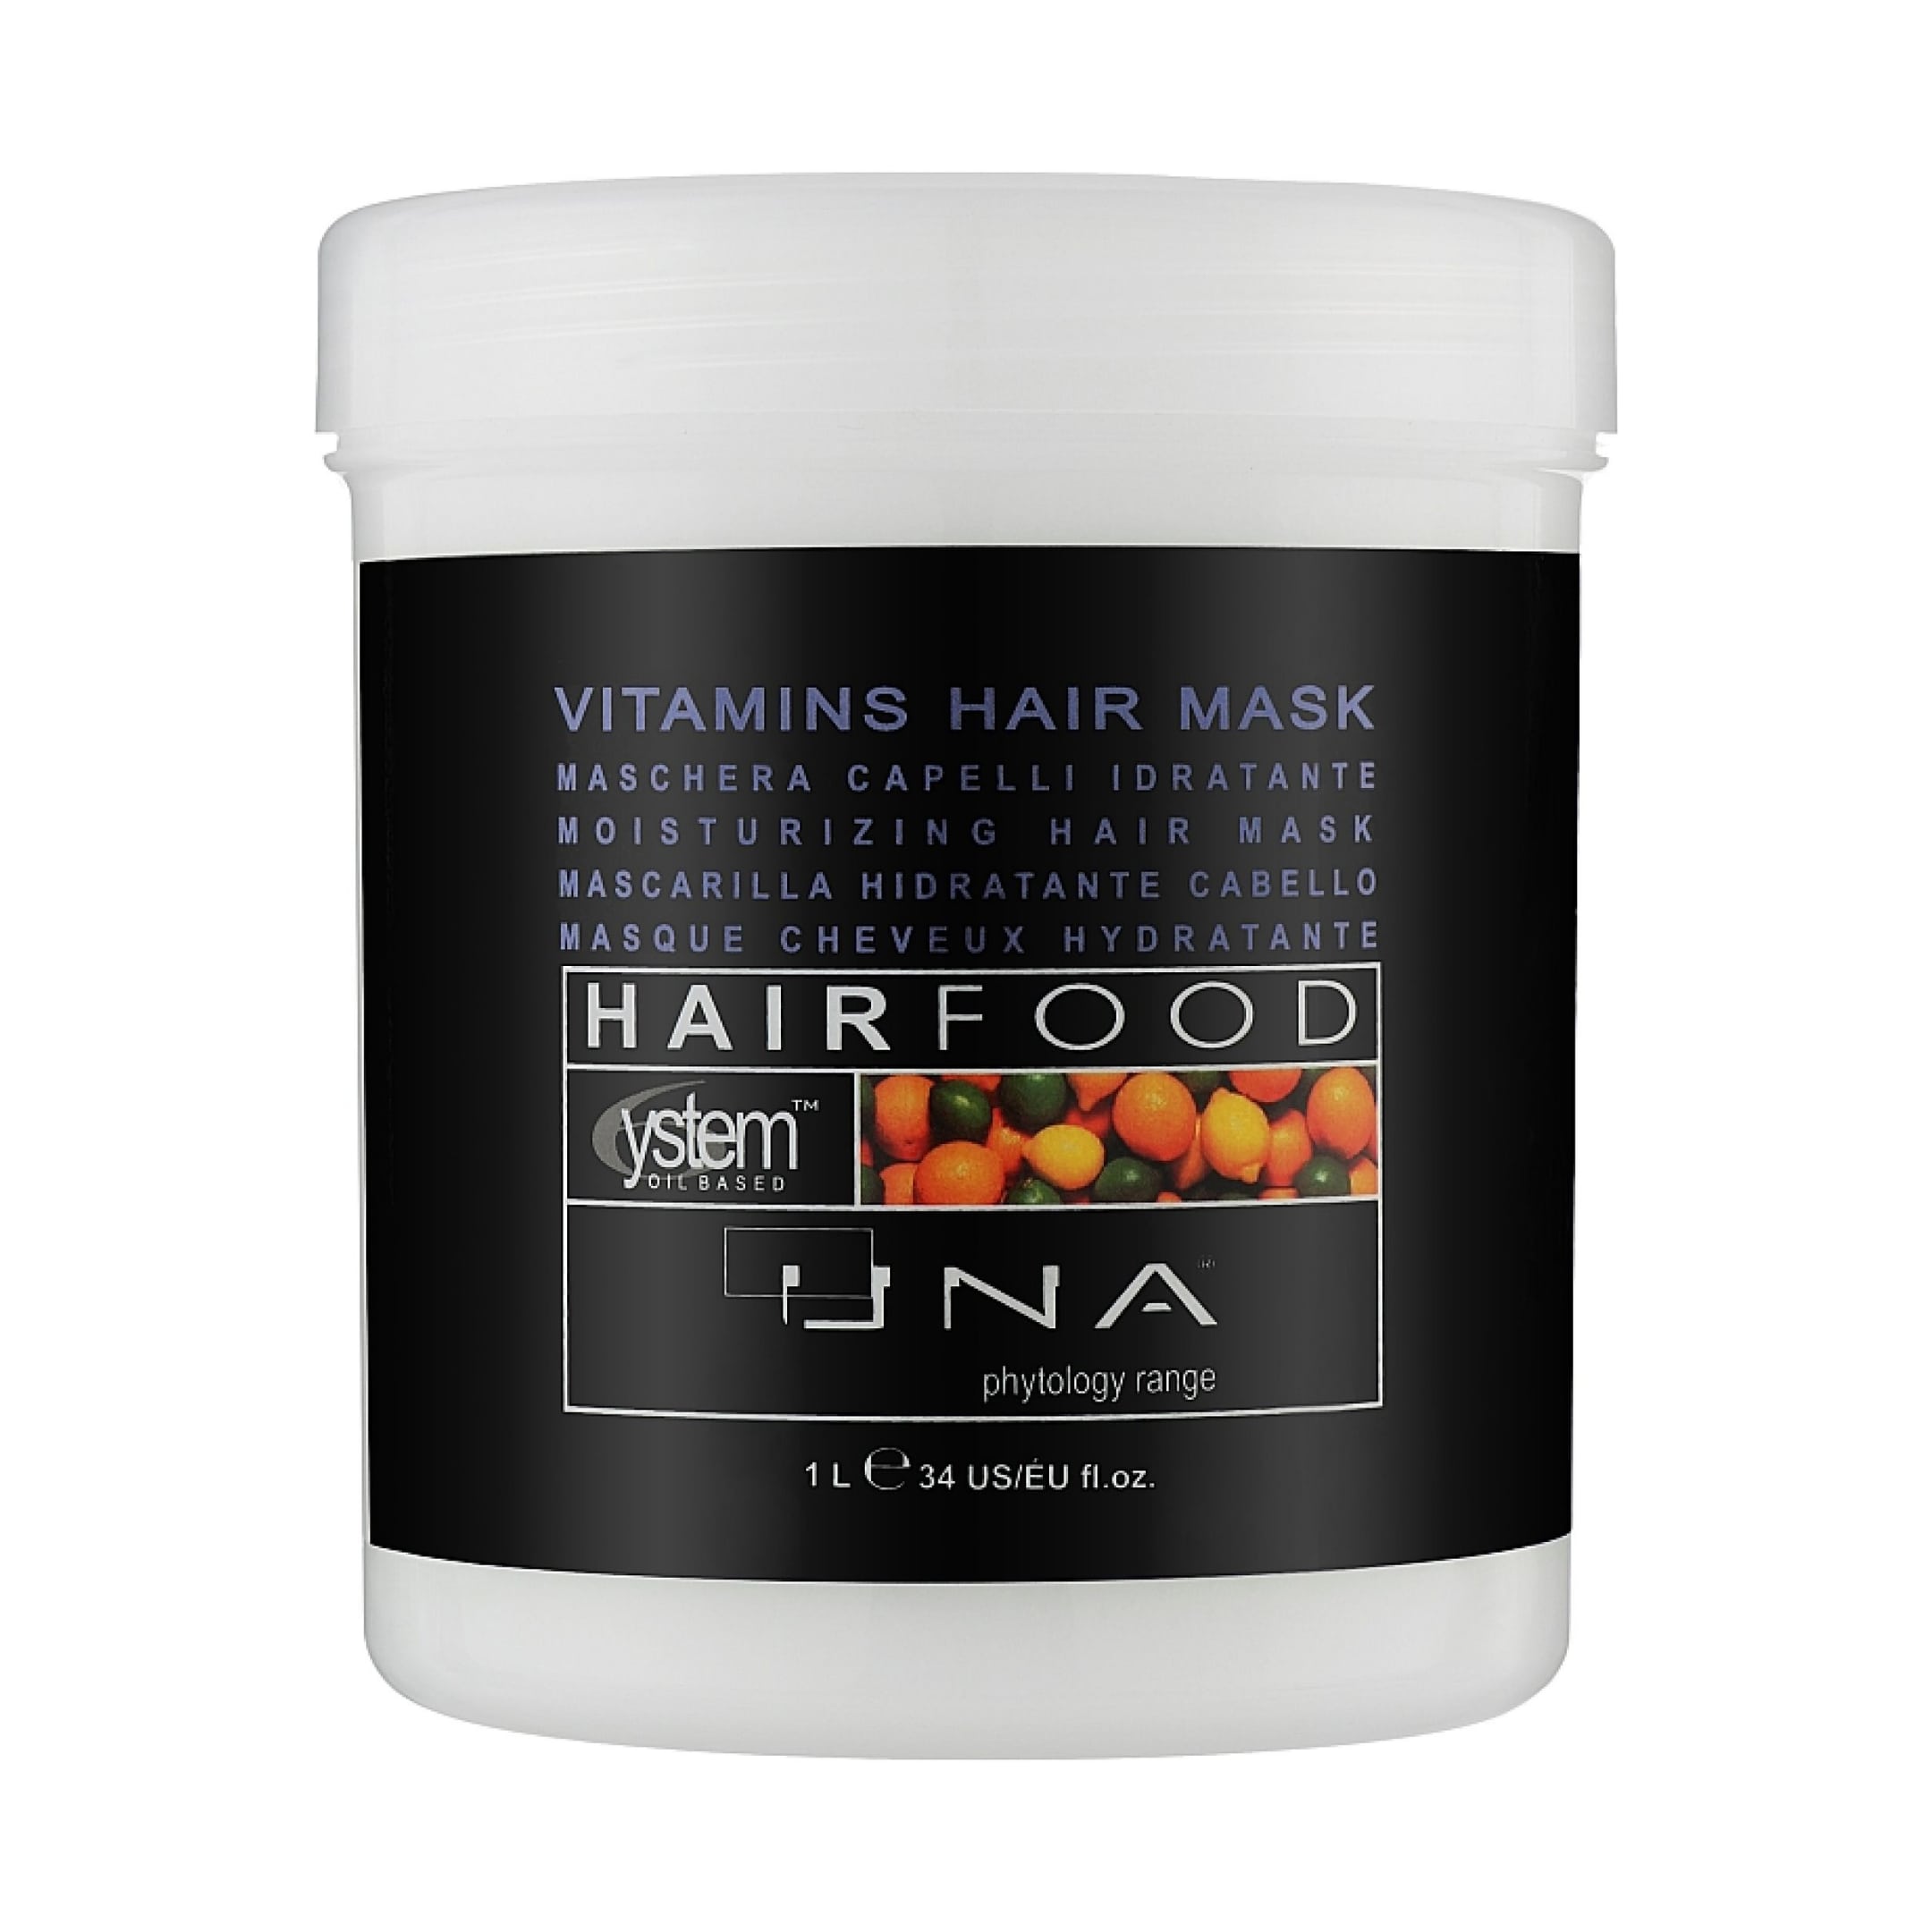 Vitamin-enriched hair food with nourishing blend of Vitamin A, E, and H